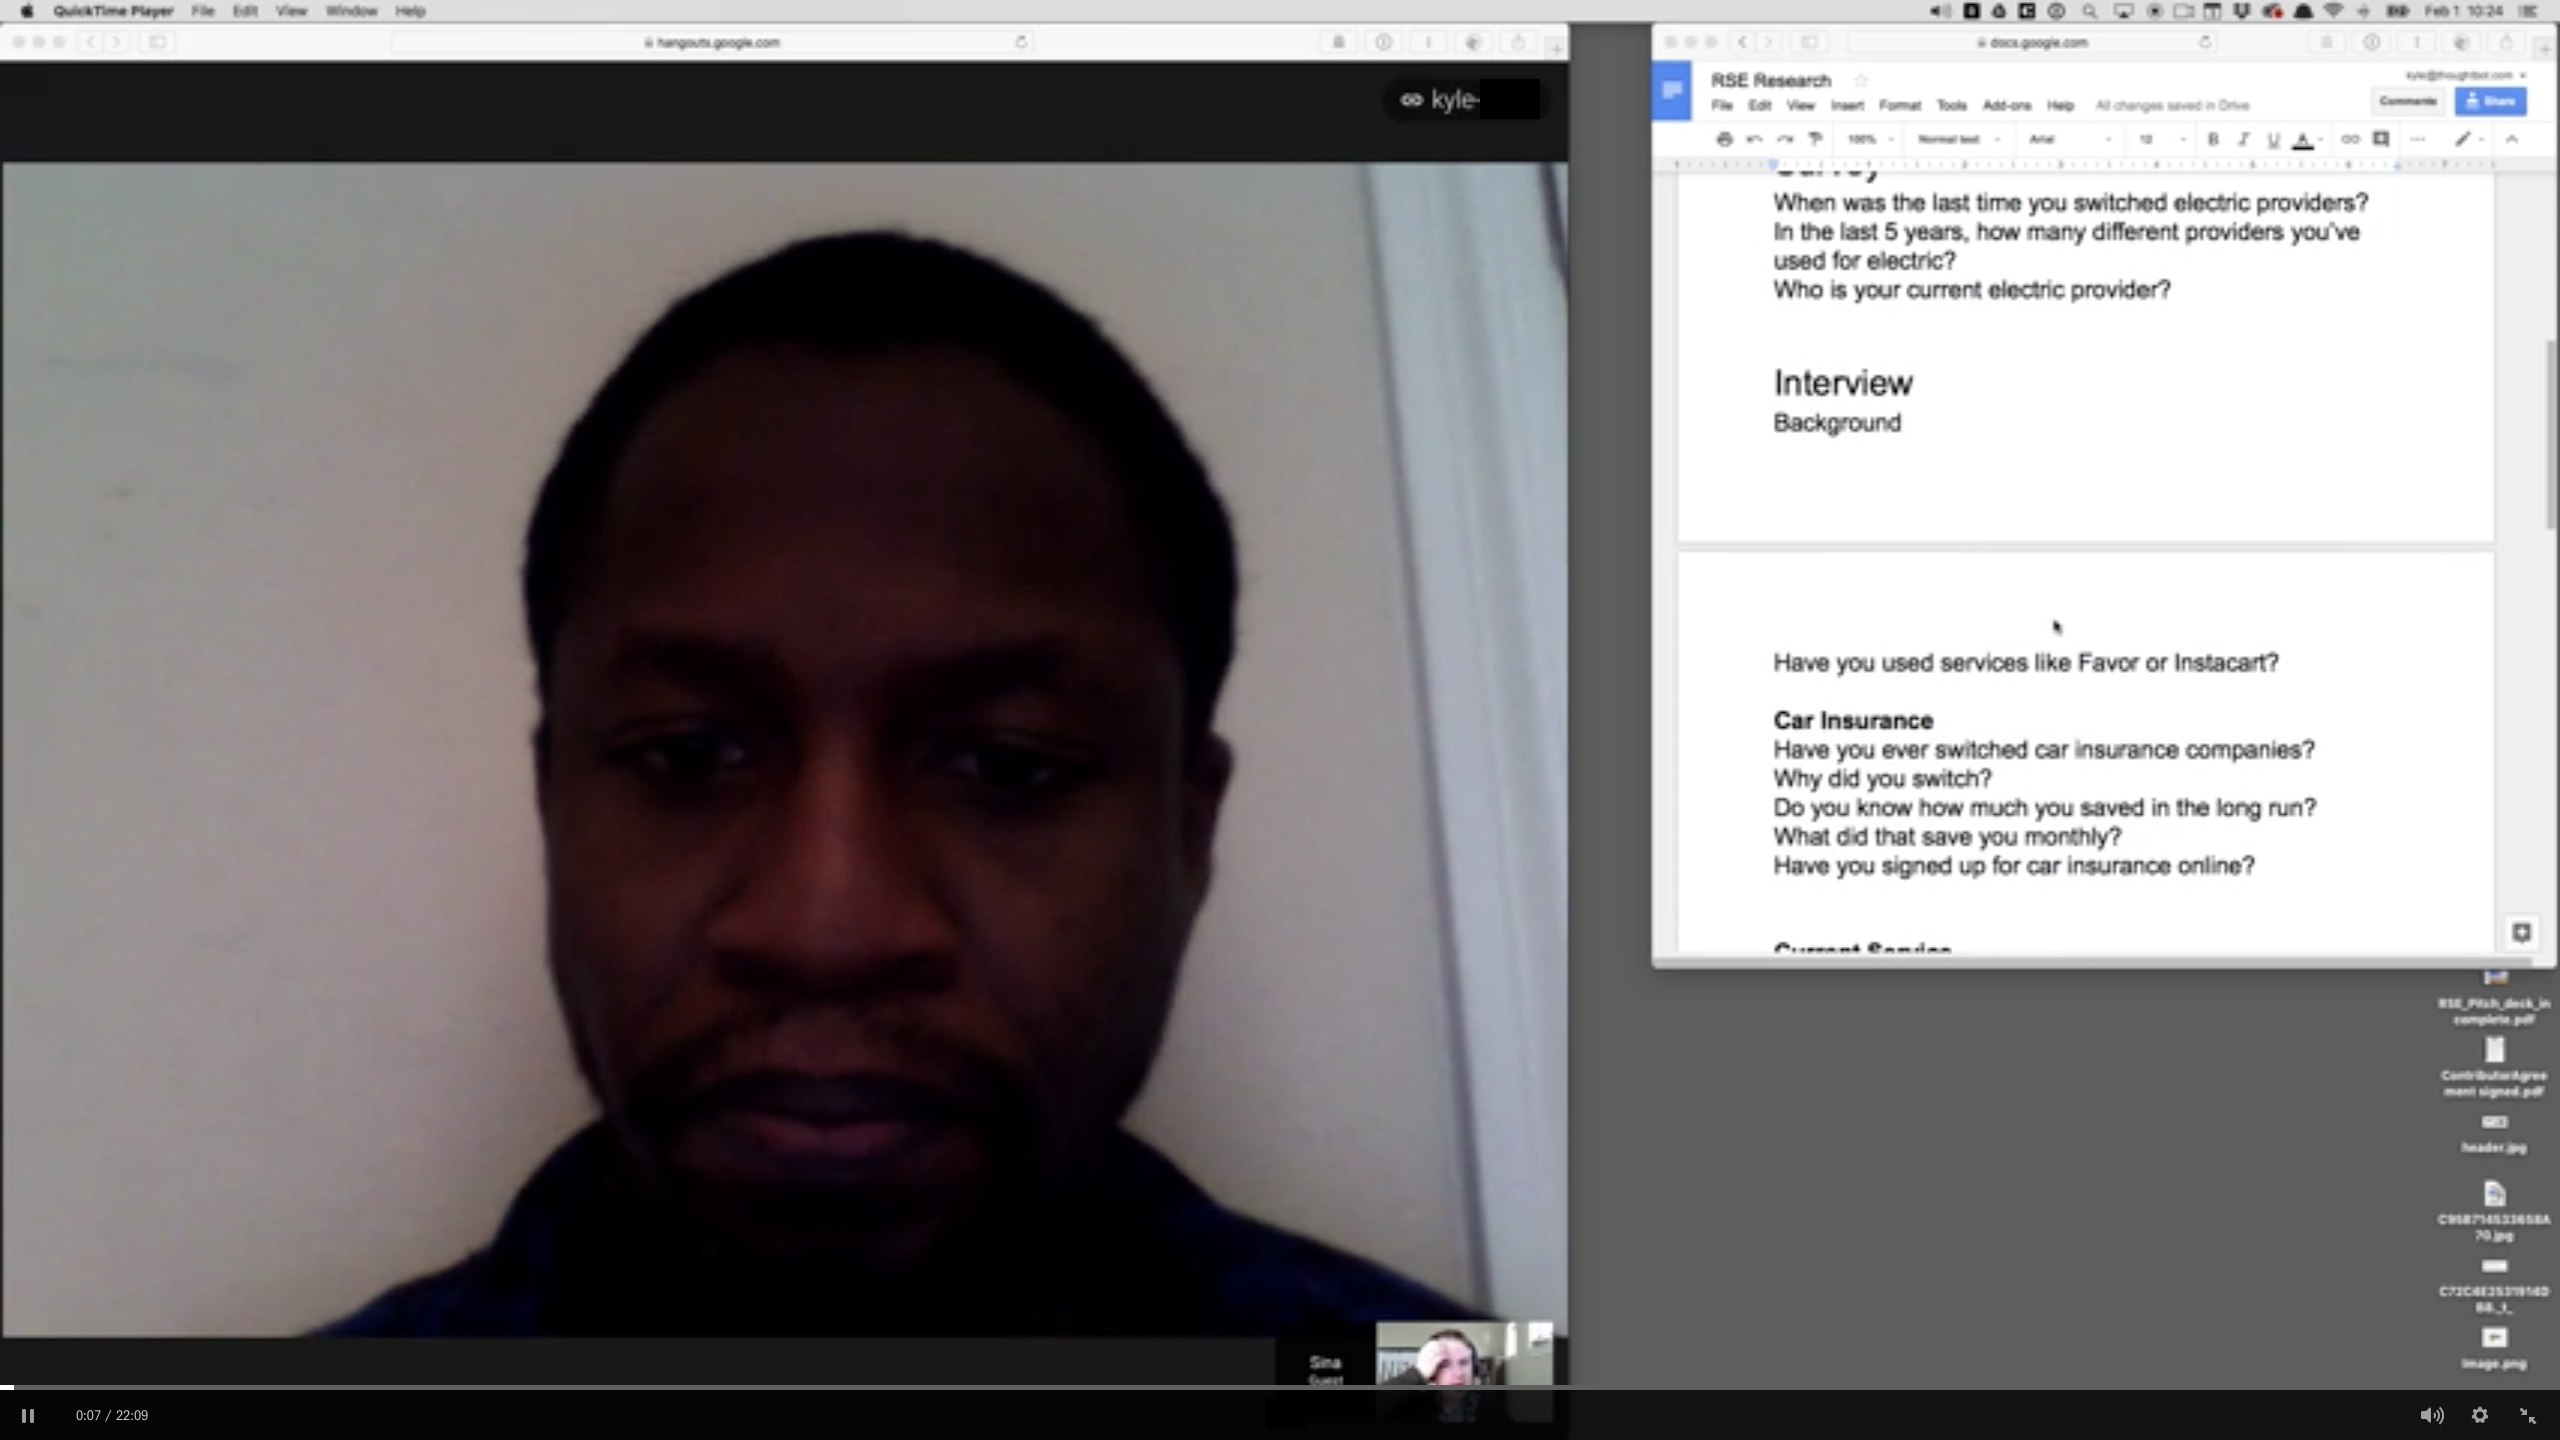 My screen conducting an interview with a man. Video call on the left and my notes on the right.